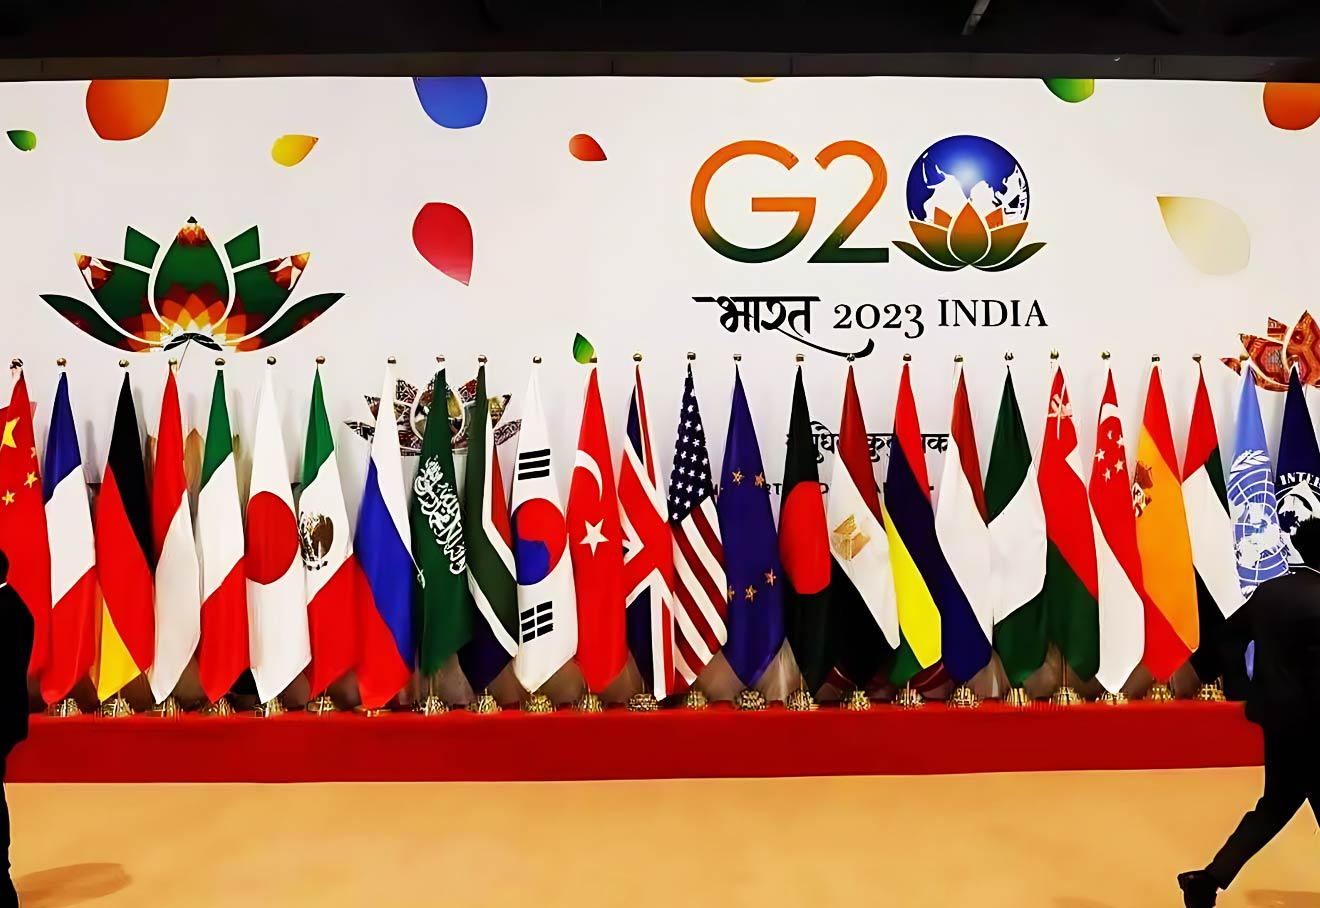 Traders In New Delhi Suffer Losses Worth Rs 400 Cr Due To Closure During G20 Summit